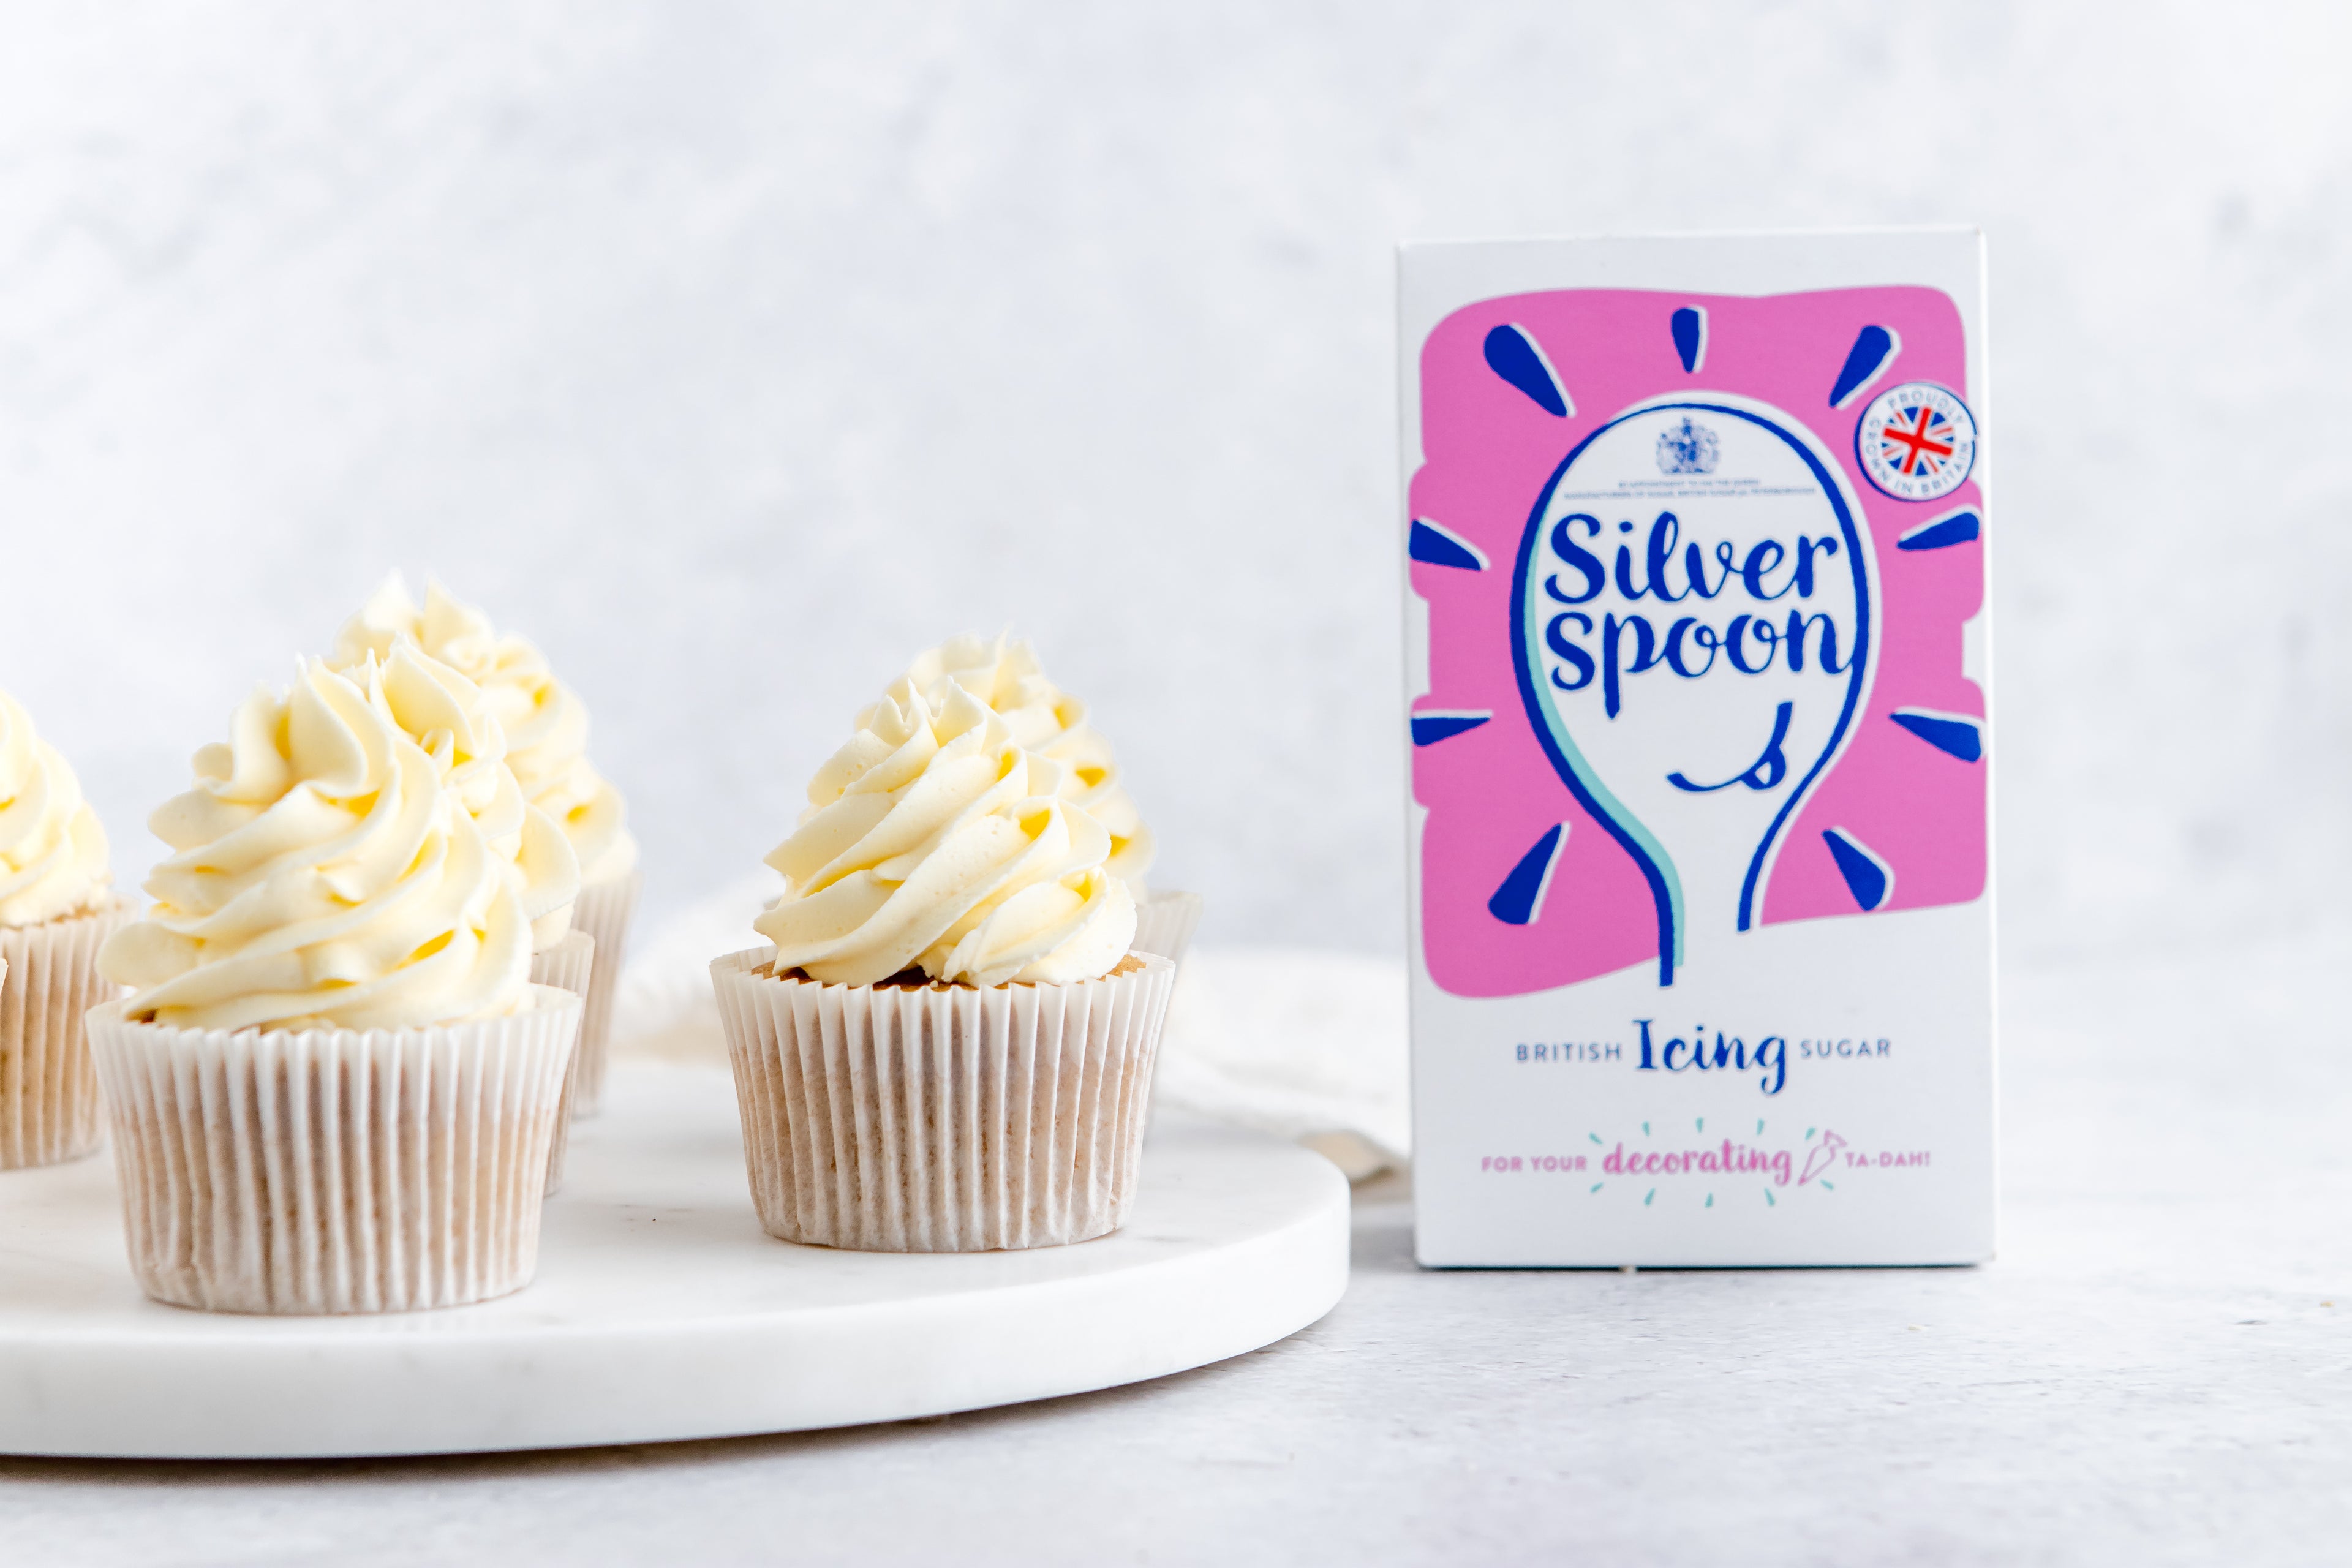 Gluten Free Cupcakes placed next to a box of Silver Spoon Icing sugar